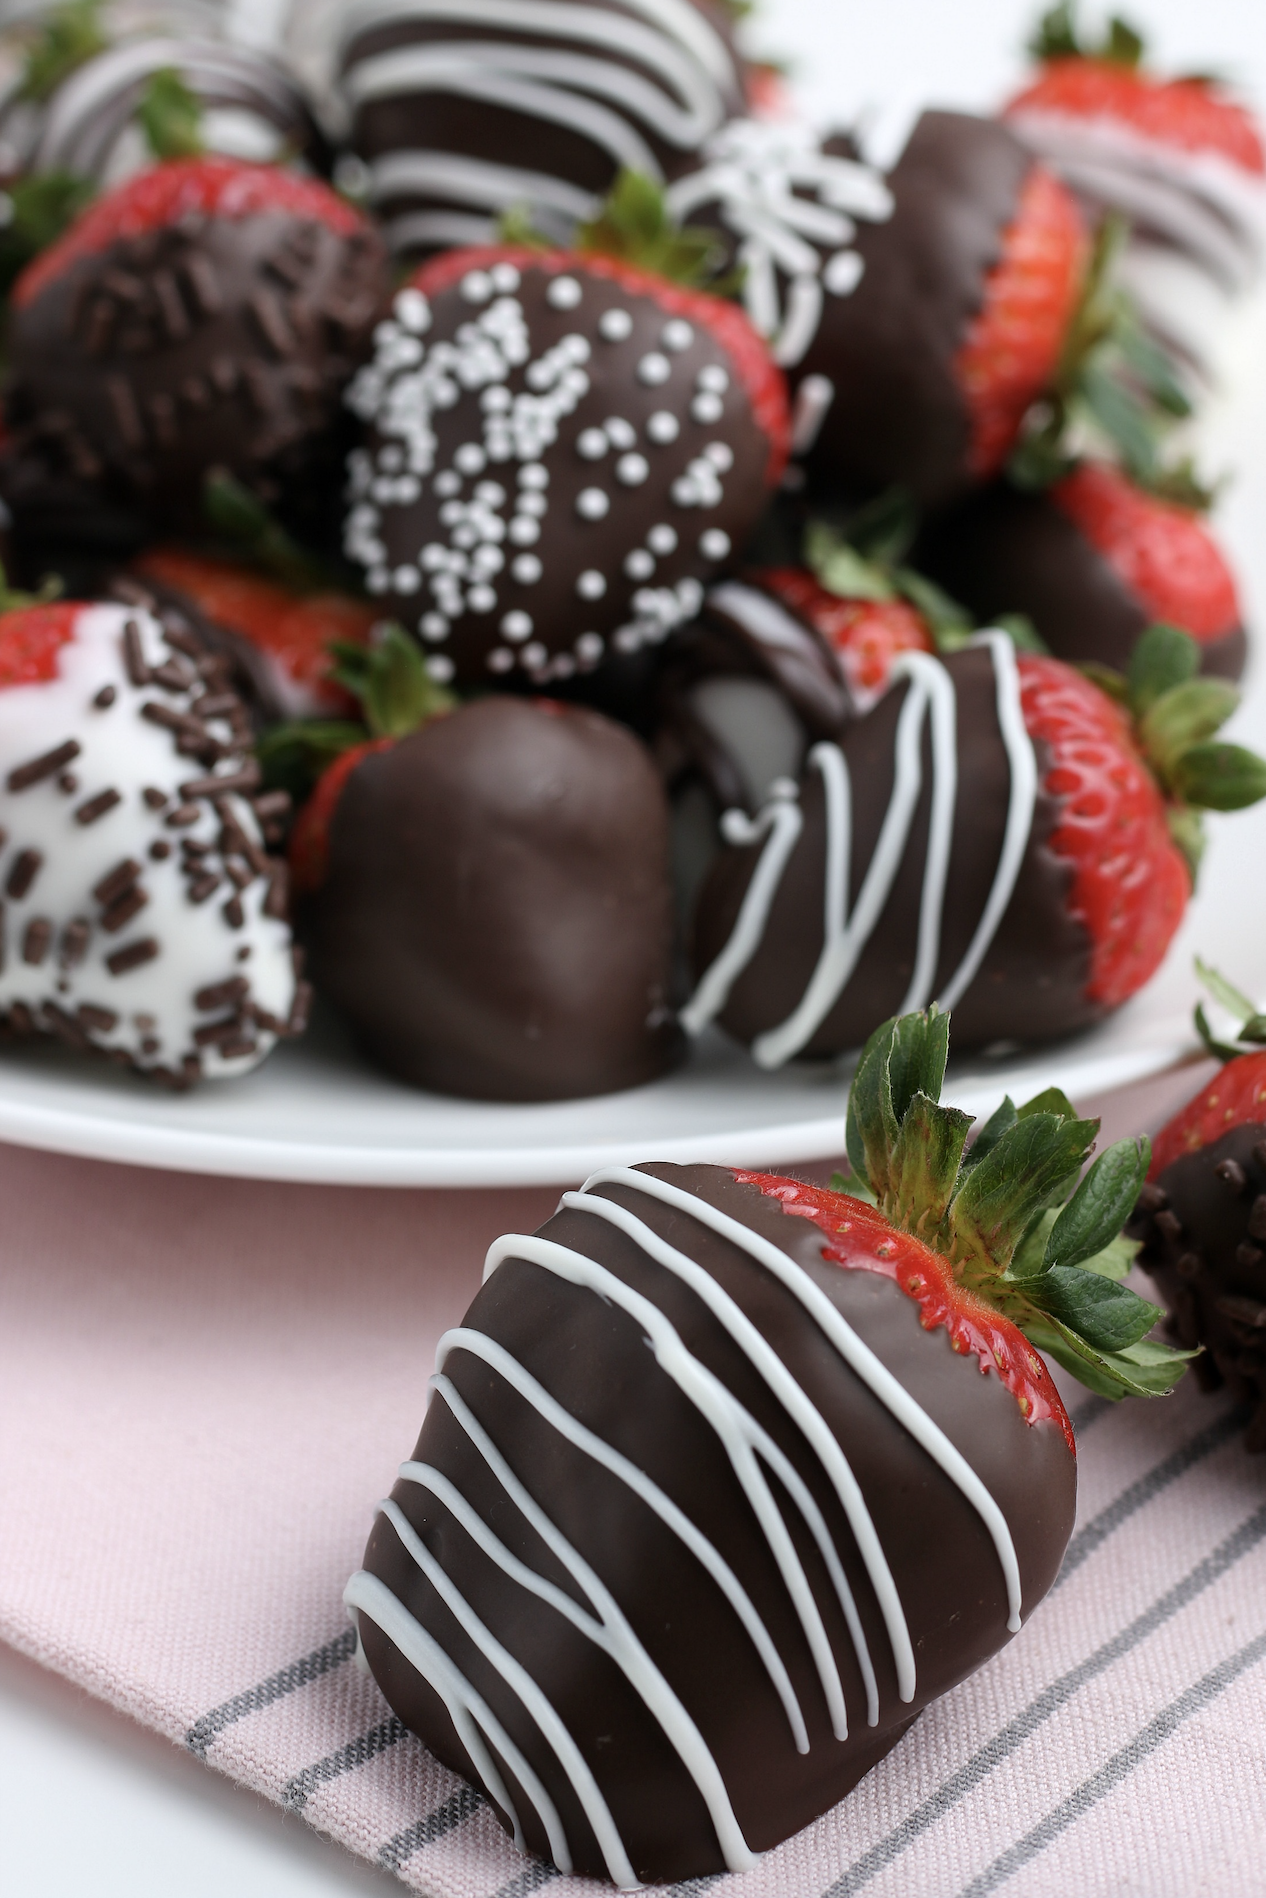 easy chocolate covered strawberries